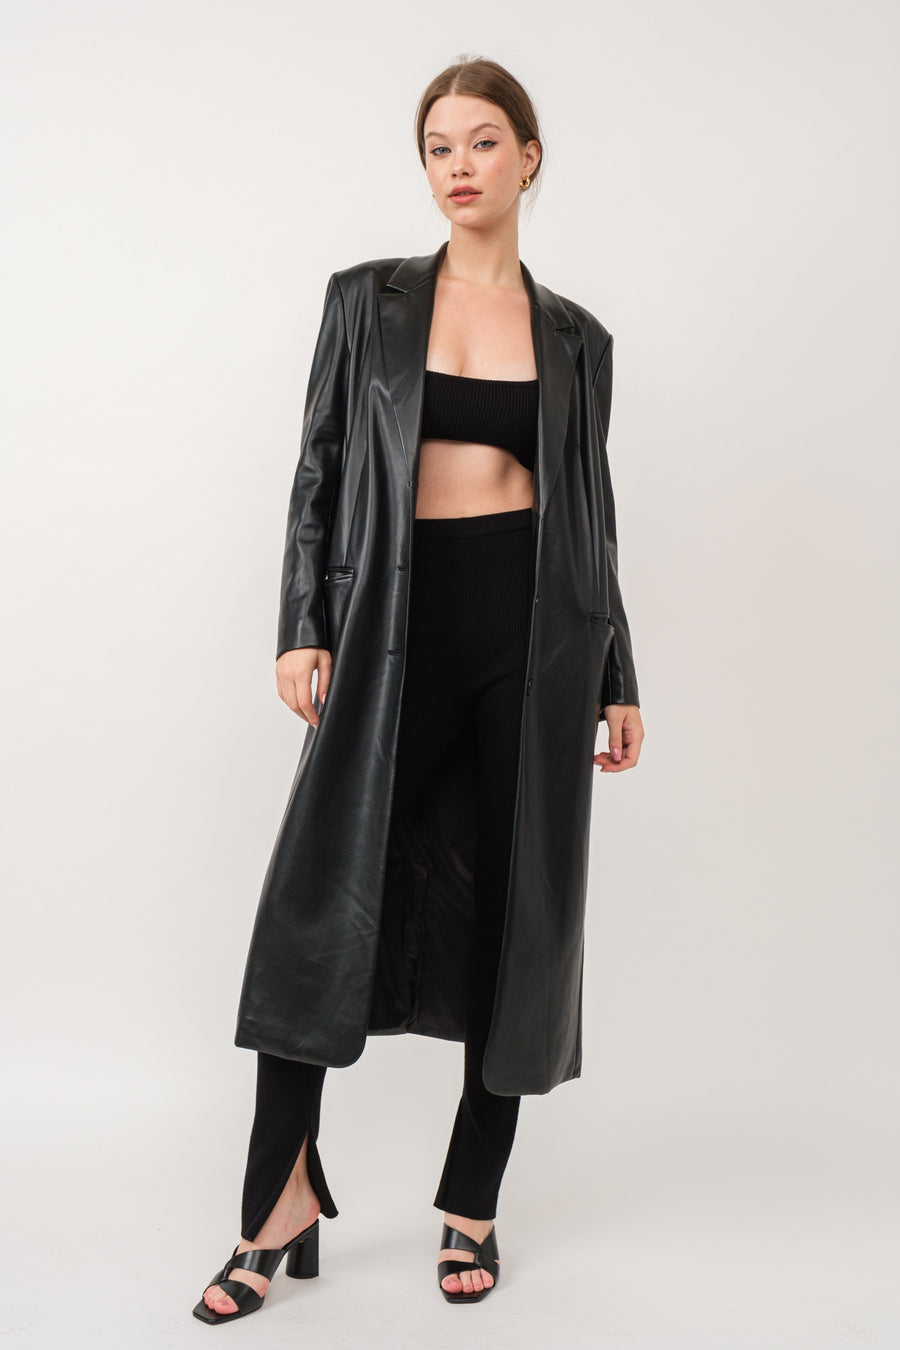 Featuring a long trench with two front buttons and removable shoulder pads in the color black